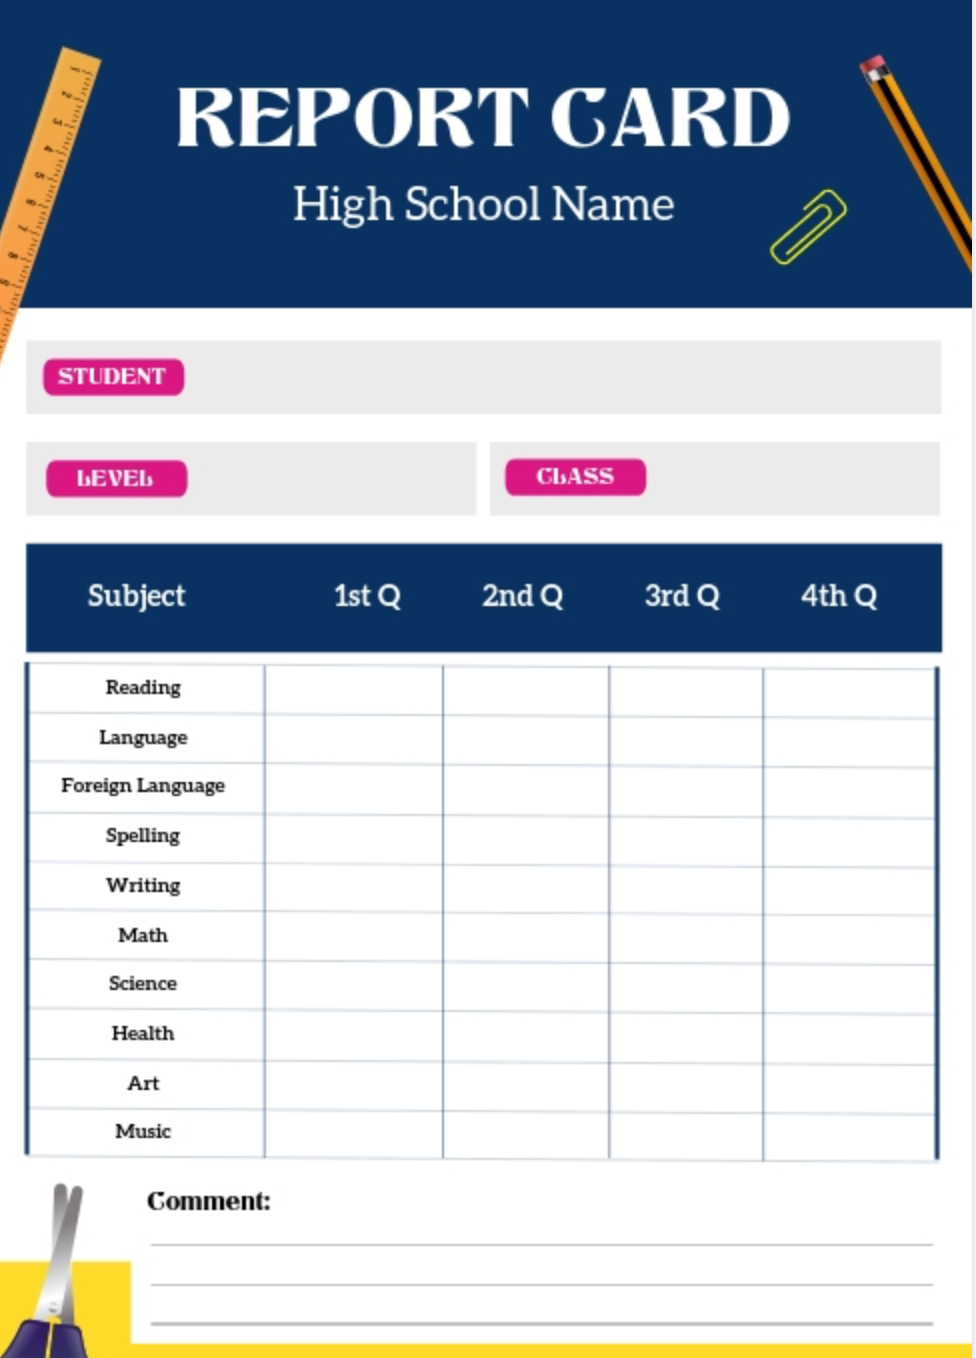 Report card Blank Template - Imgflip Pertaining To Blank Report Card Template